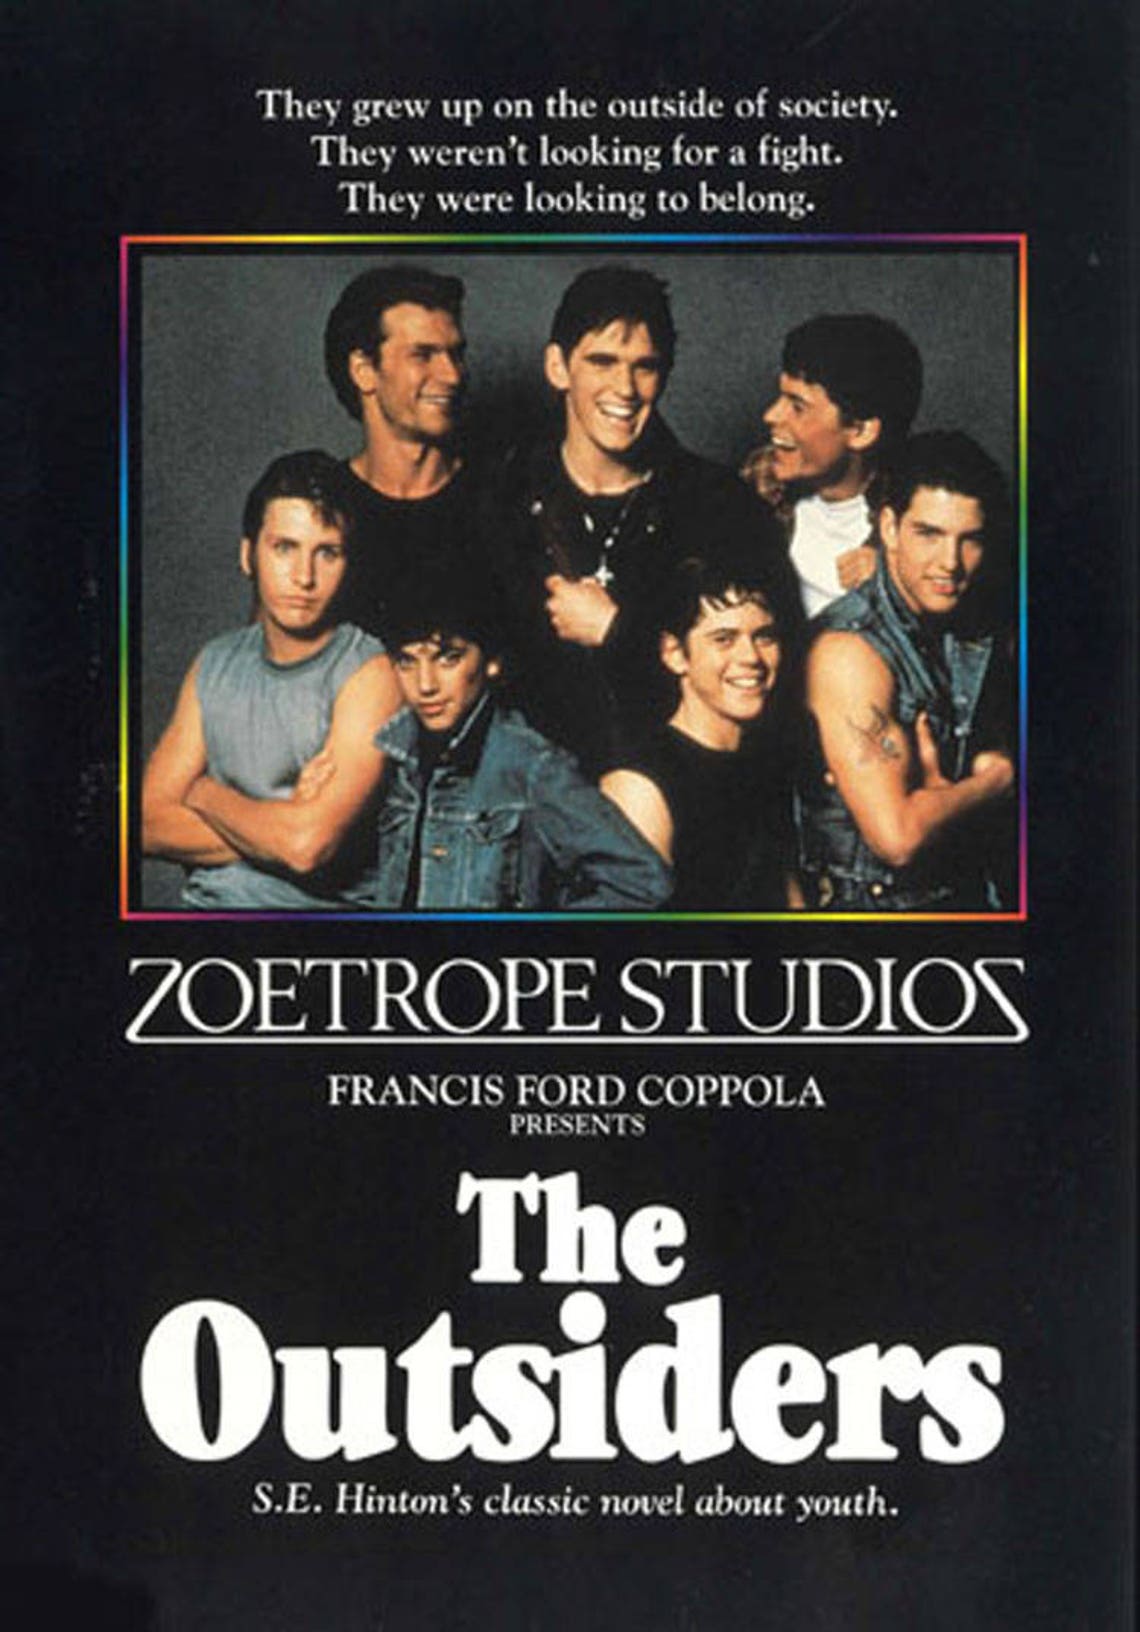 The Outsiders Tom Cruise Cult Movie Poster Reprint 19x12.5 - Etsy